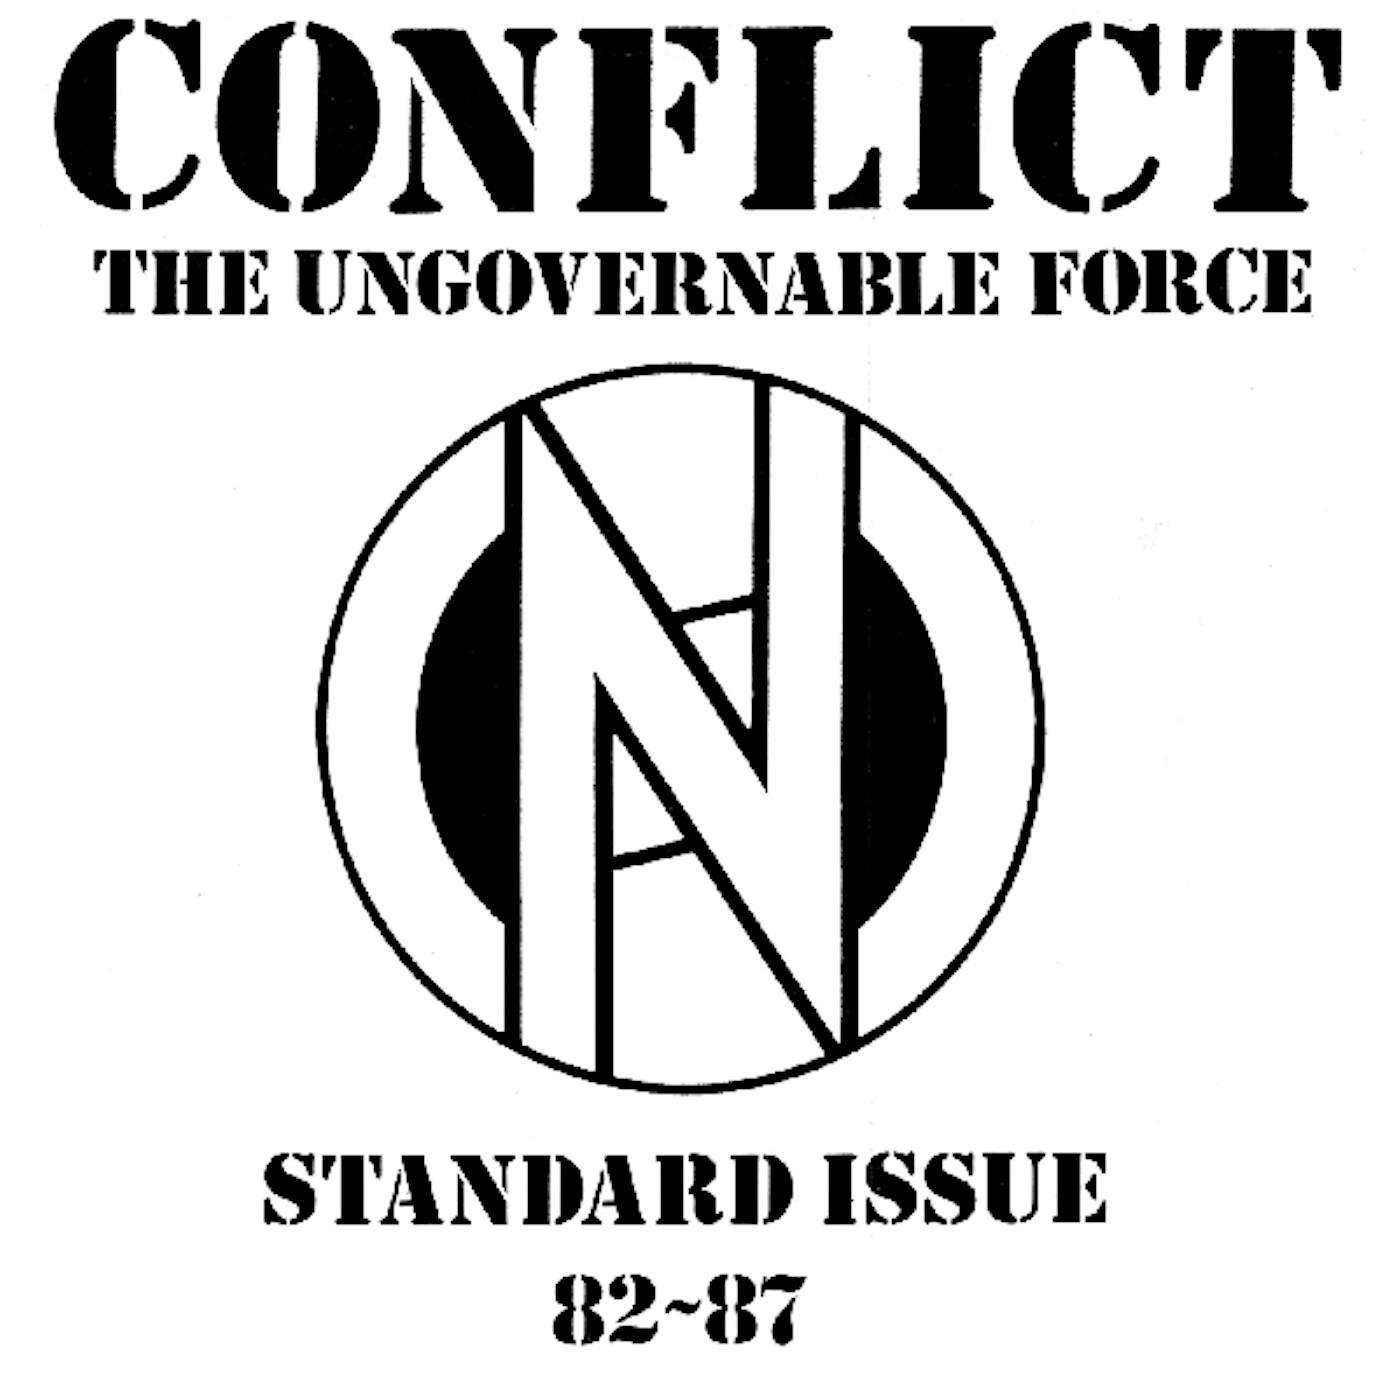 Conflict STANDARD ISSUE 82-87 Vinyl Record